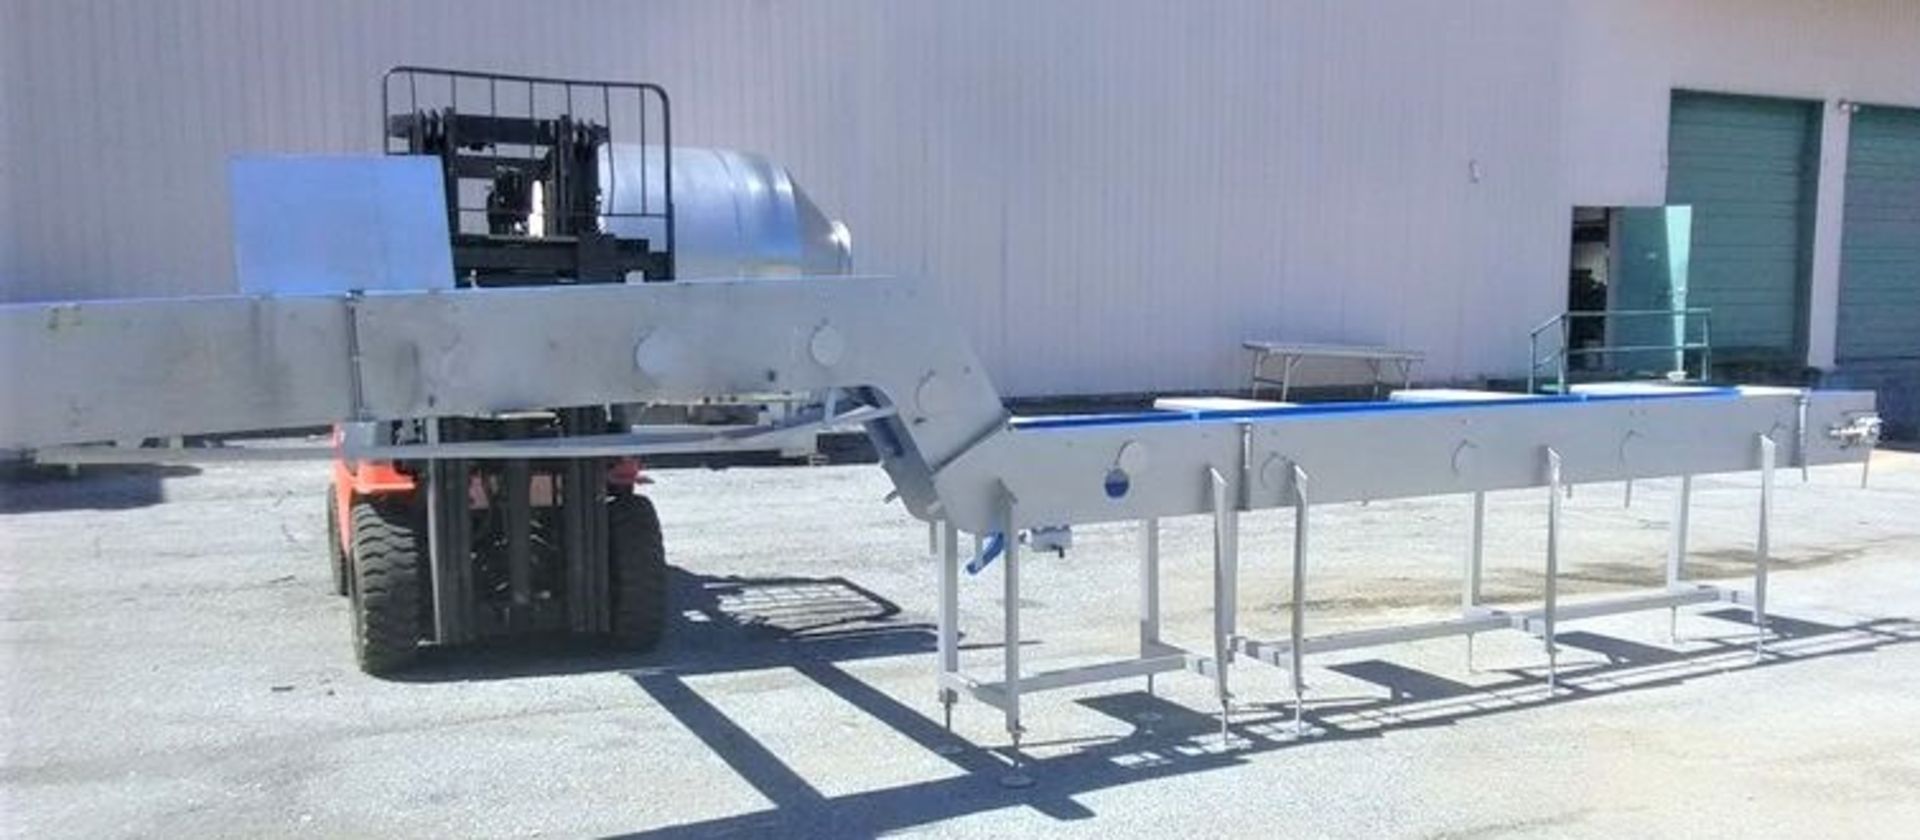 24'L x 12" W Sort and Elevate Conveyor